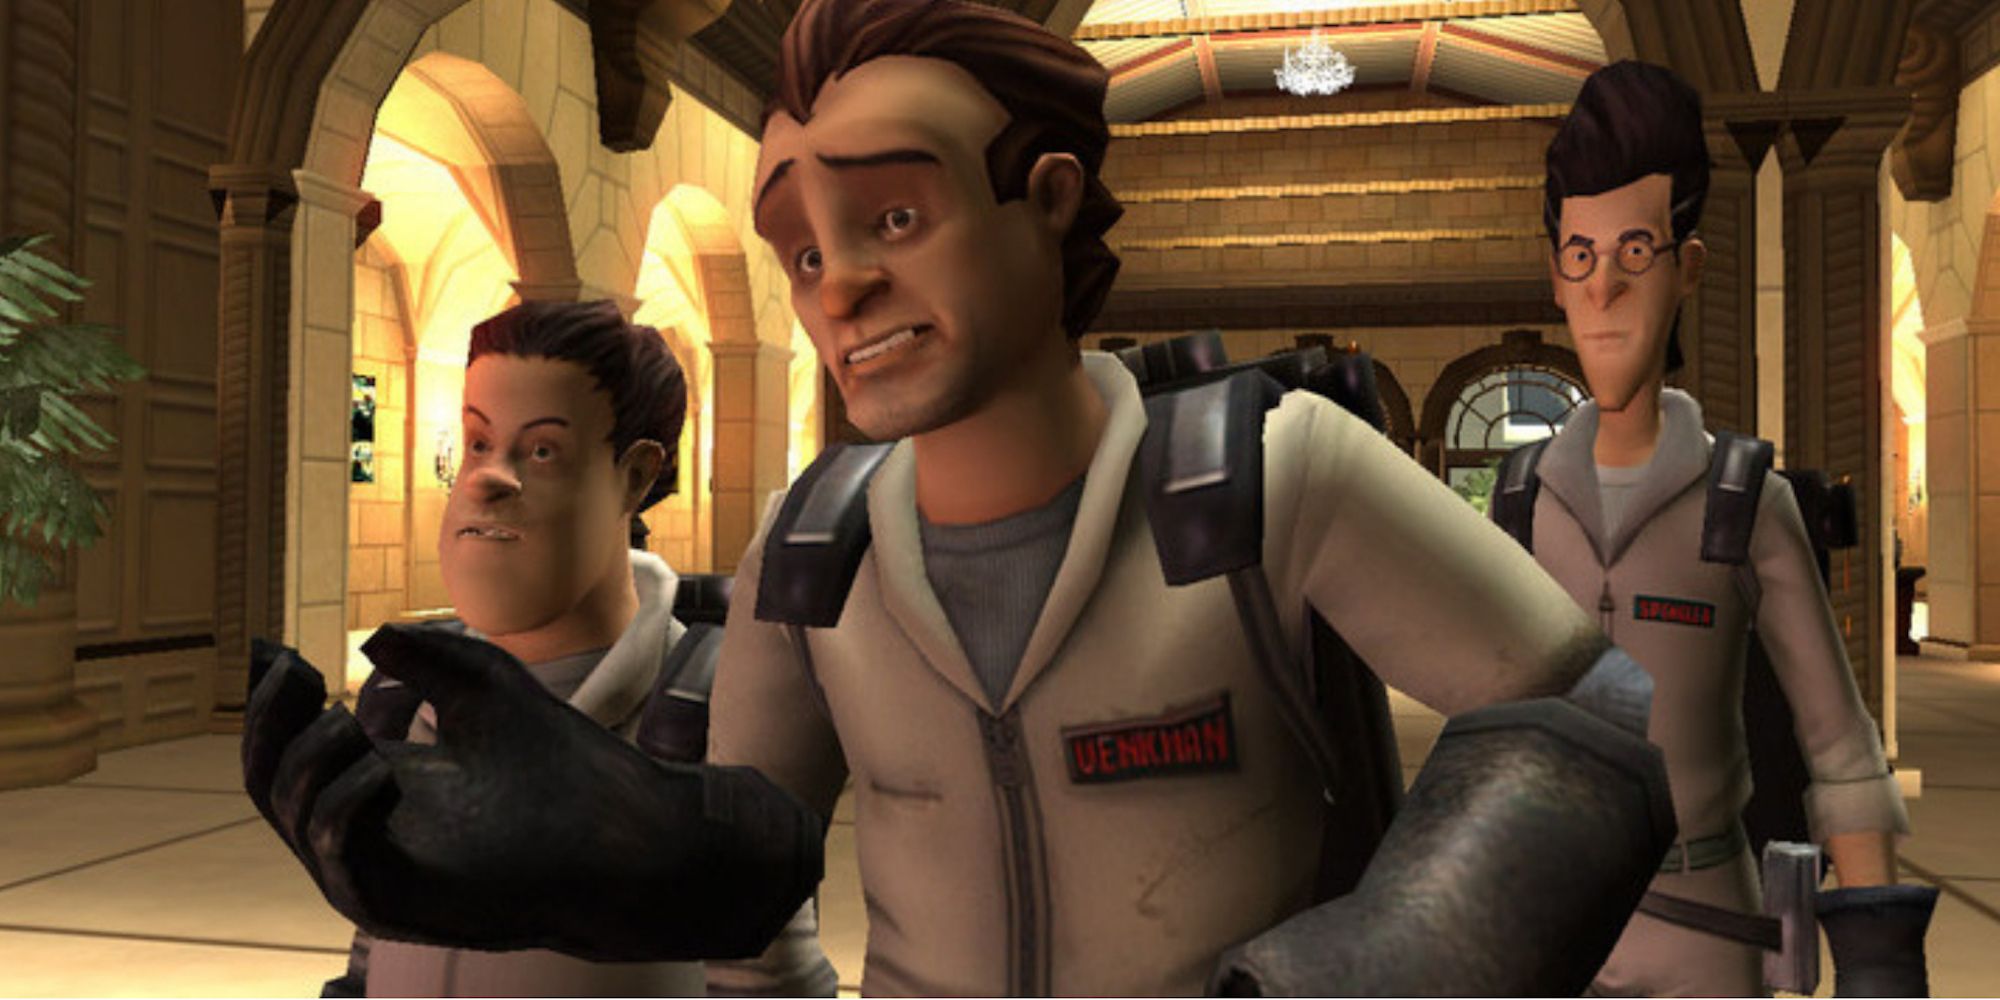 A cutscene featuring characters in Ghostbusters The Video Game